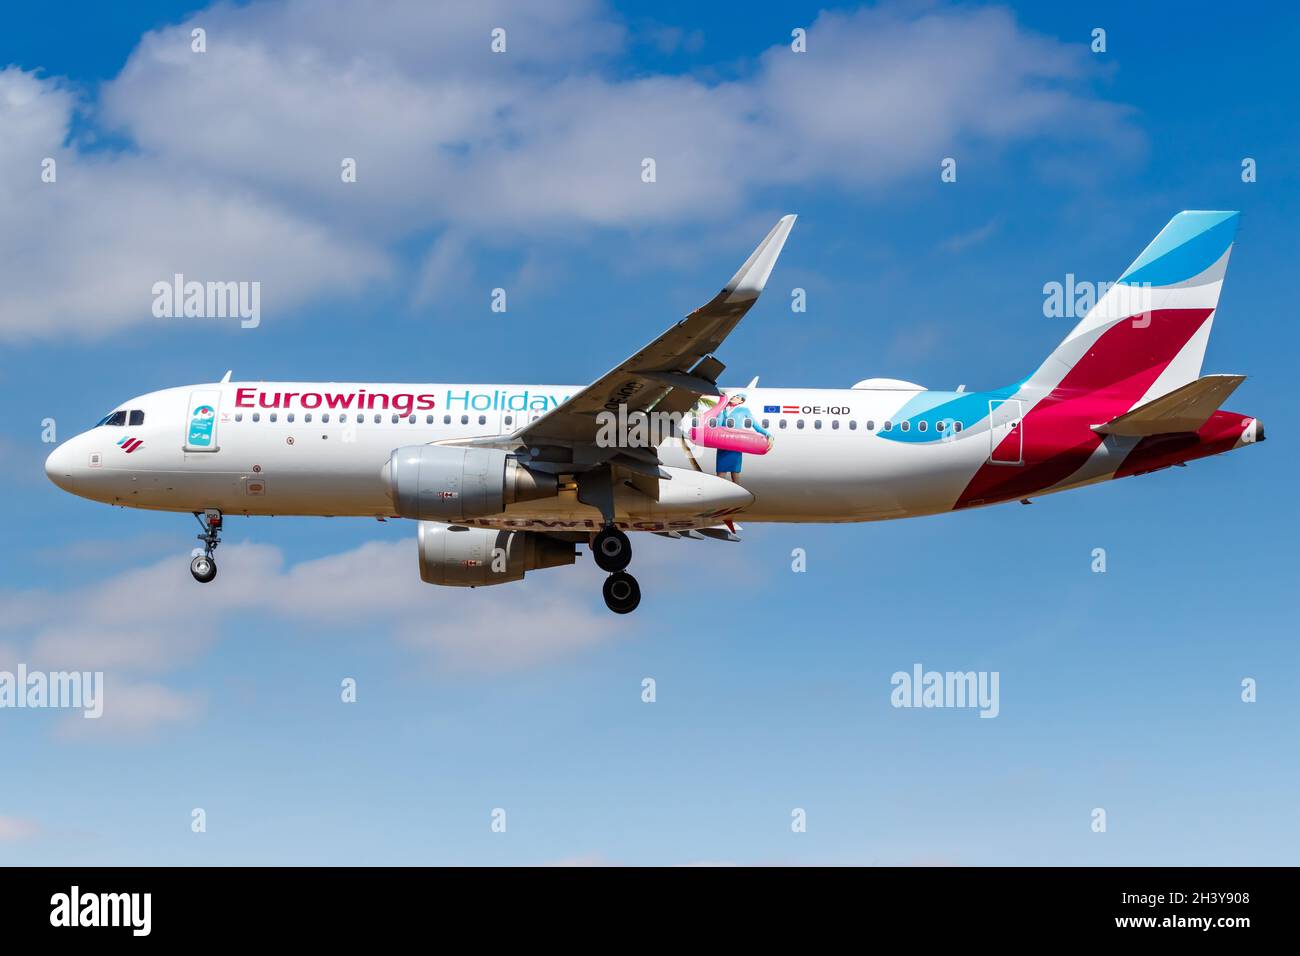 Eurowings Airbus A320 aircraft at London Heathrow special livery Holidays Stock Photo